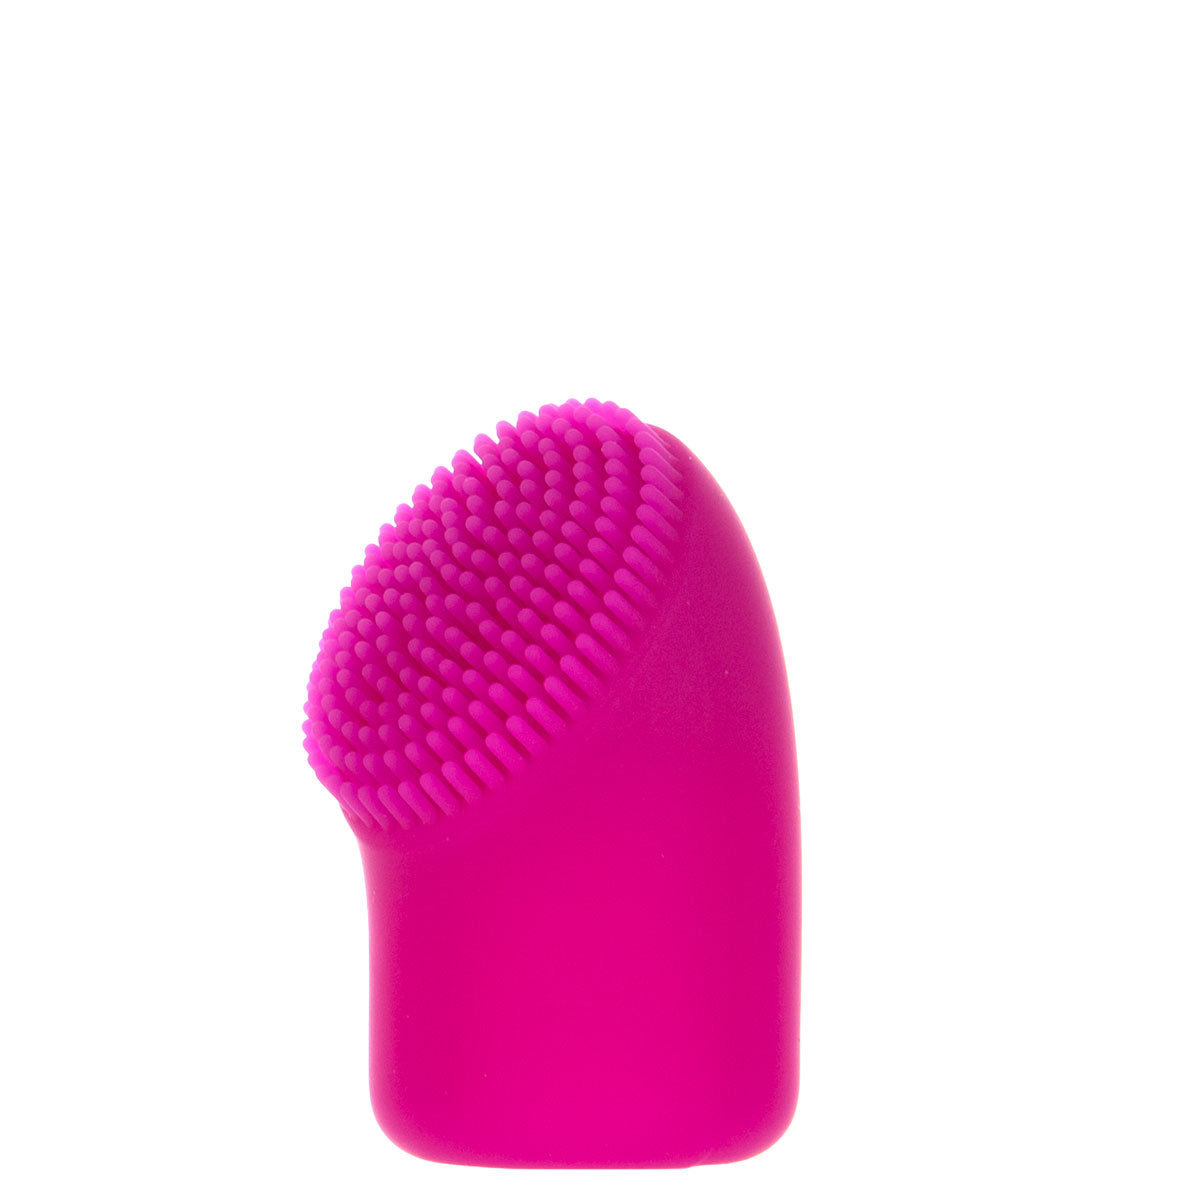 PalmPocket Extended – Silicone Massage Heads – For Use with PalmPower Pocket – Pink